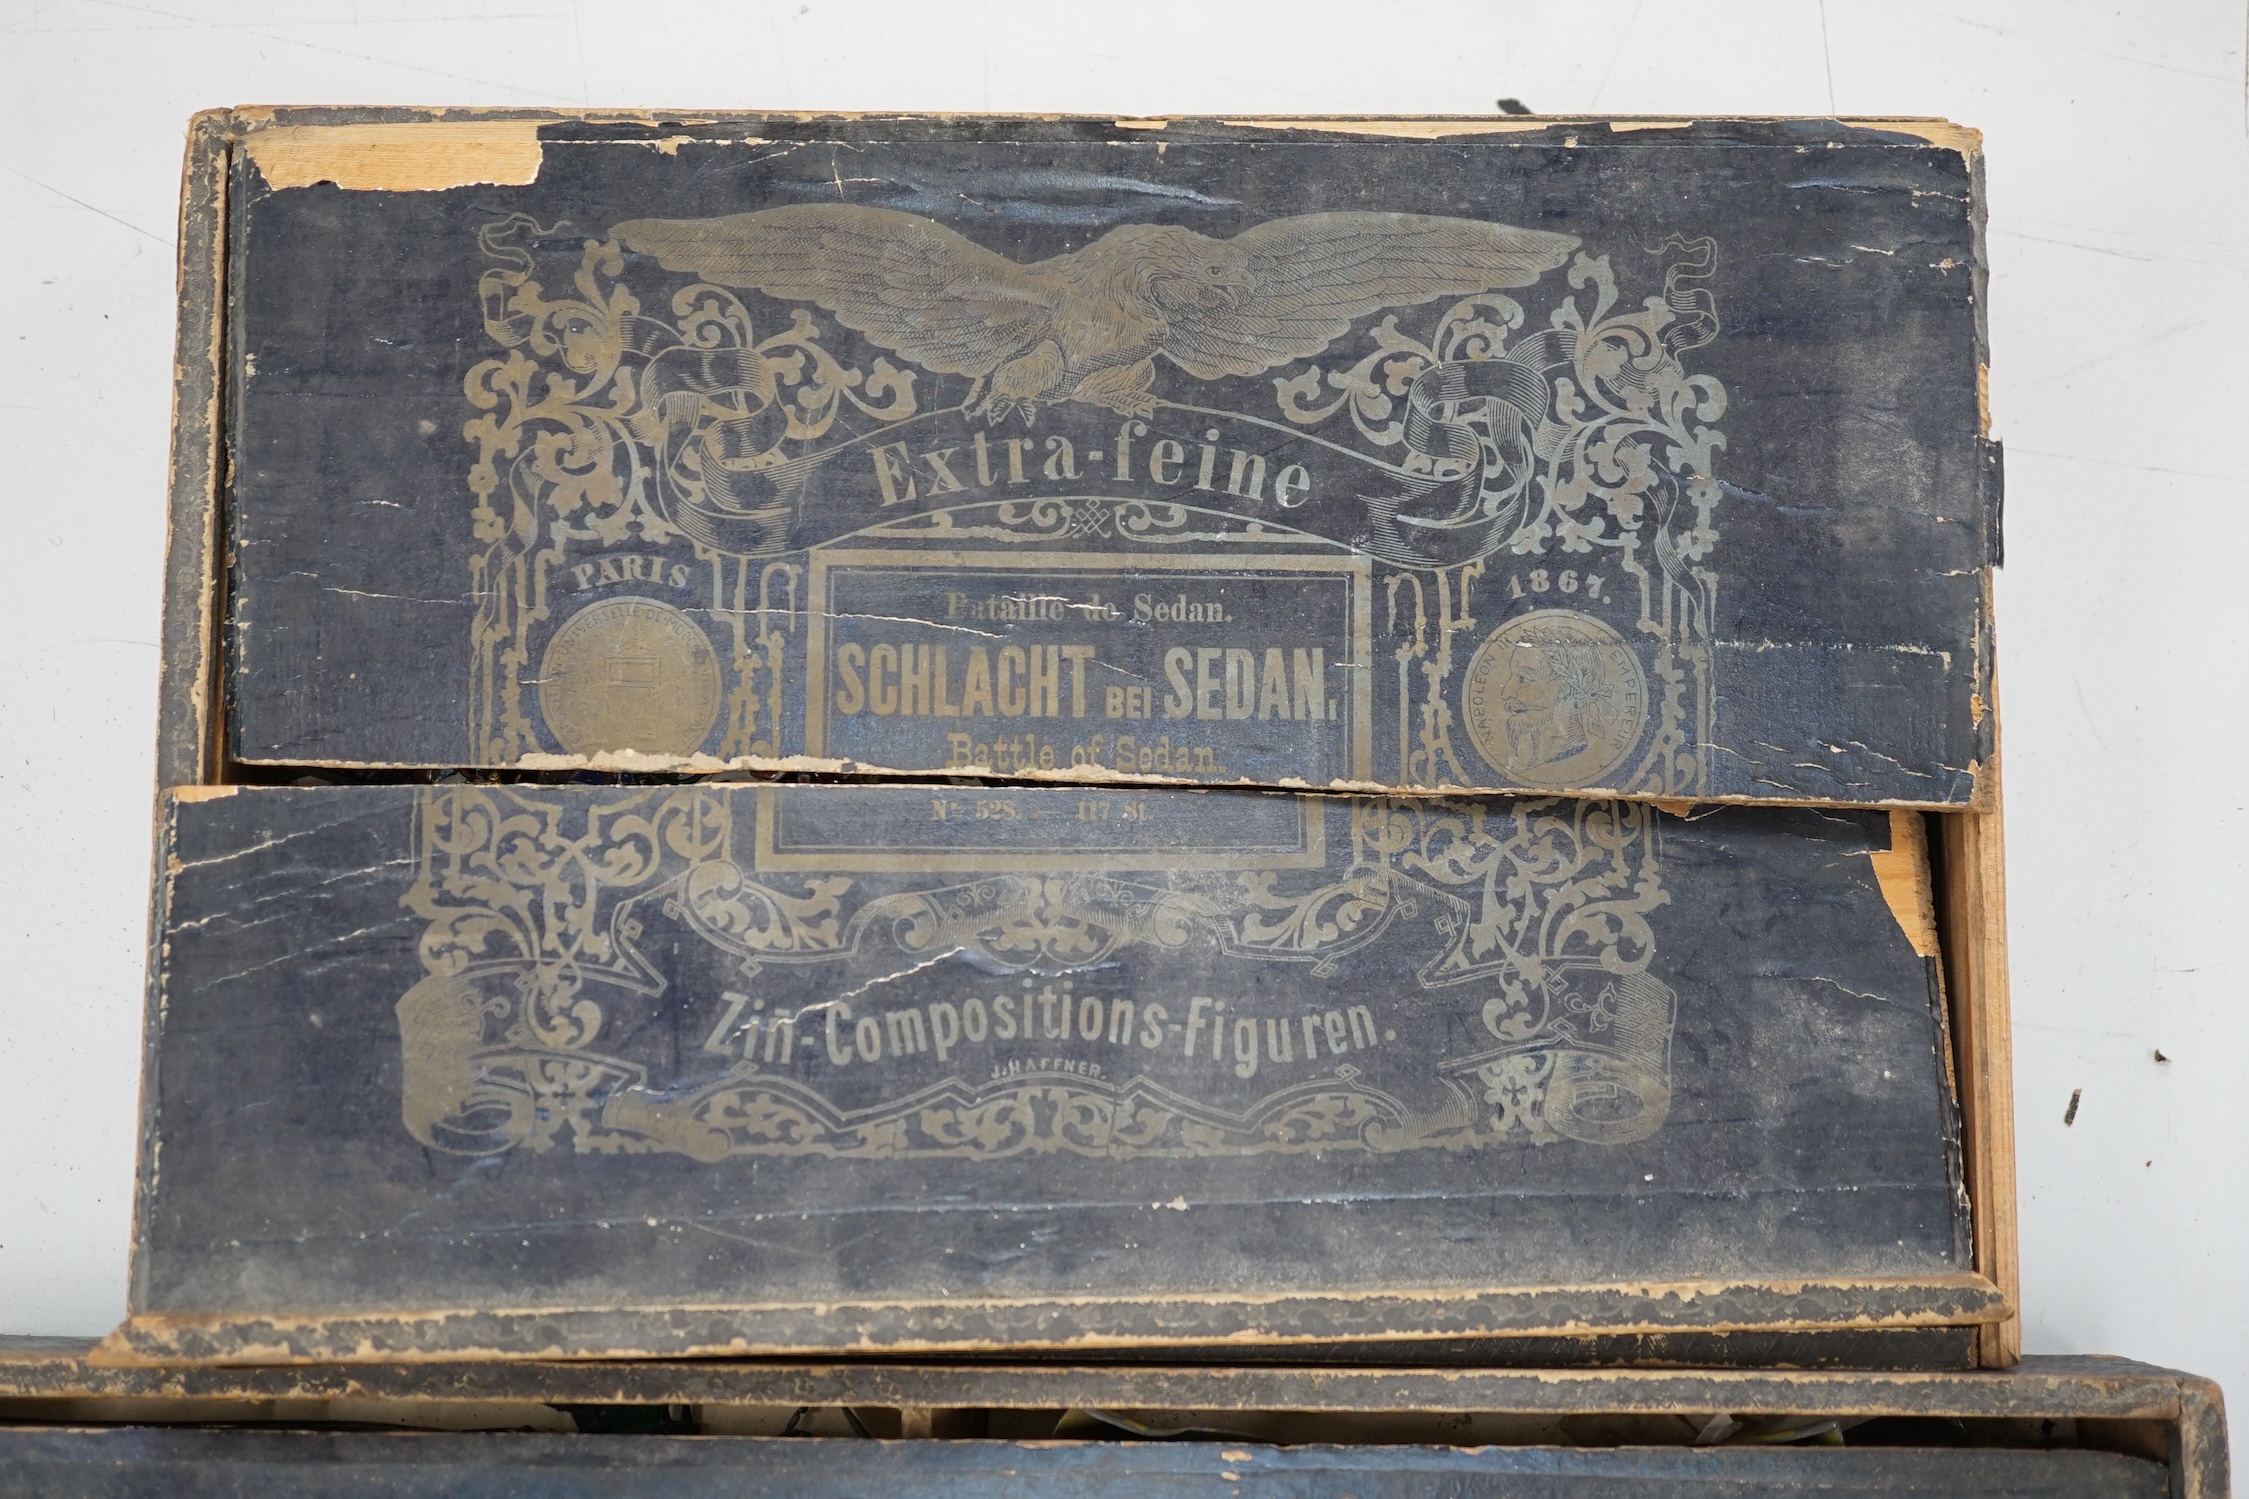 Two late nineteenth century wooden Haffner boxes of flat/semi-flat soldiers, contents believed to be primarily by Haffner; ‘Fight of Paris’ (set no.543) and ‘Battle of Sedan’ (set no.528)